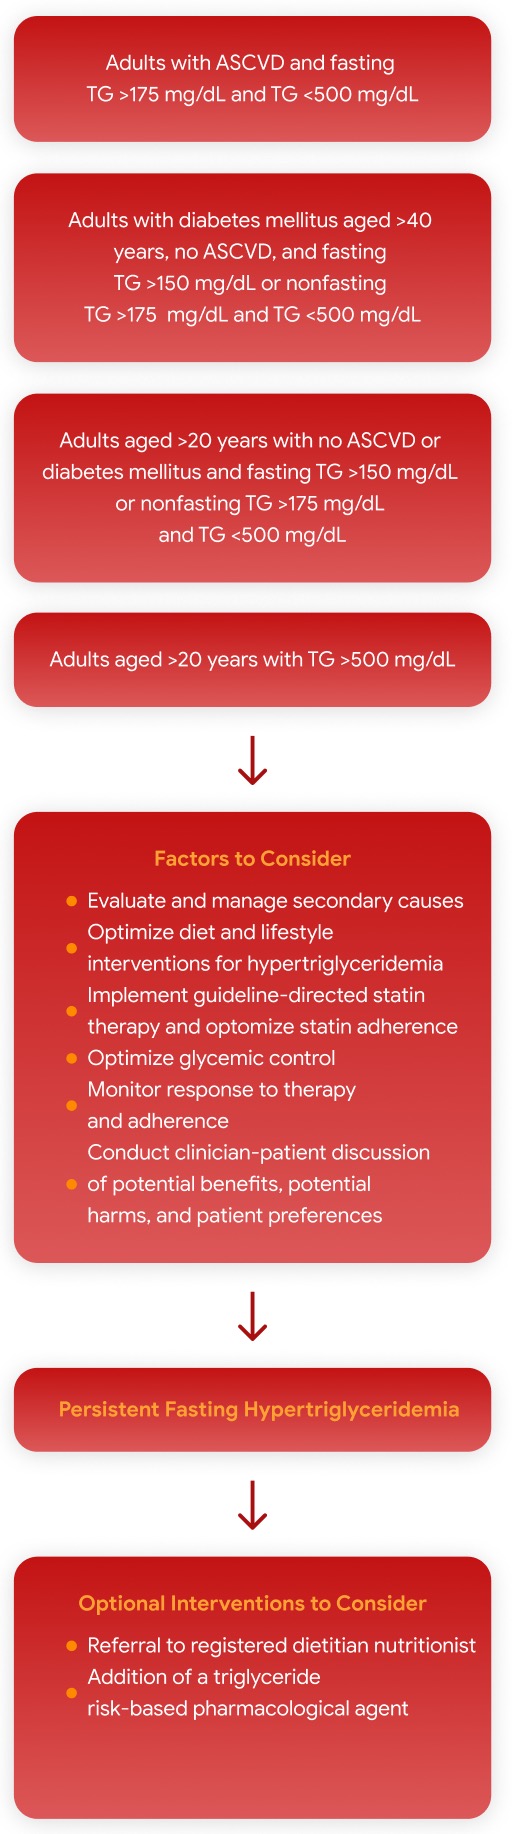 Initial Factors to Consider for Controlling TG Levels in Different Patient Subgroups